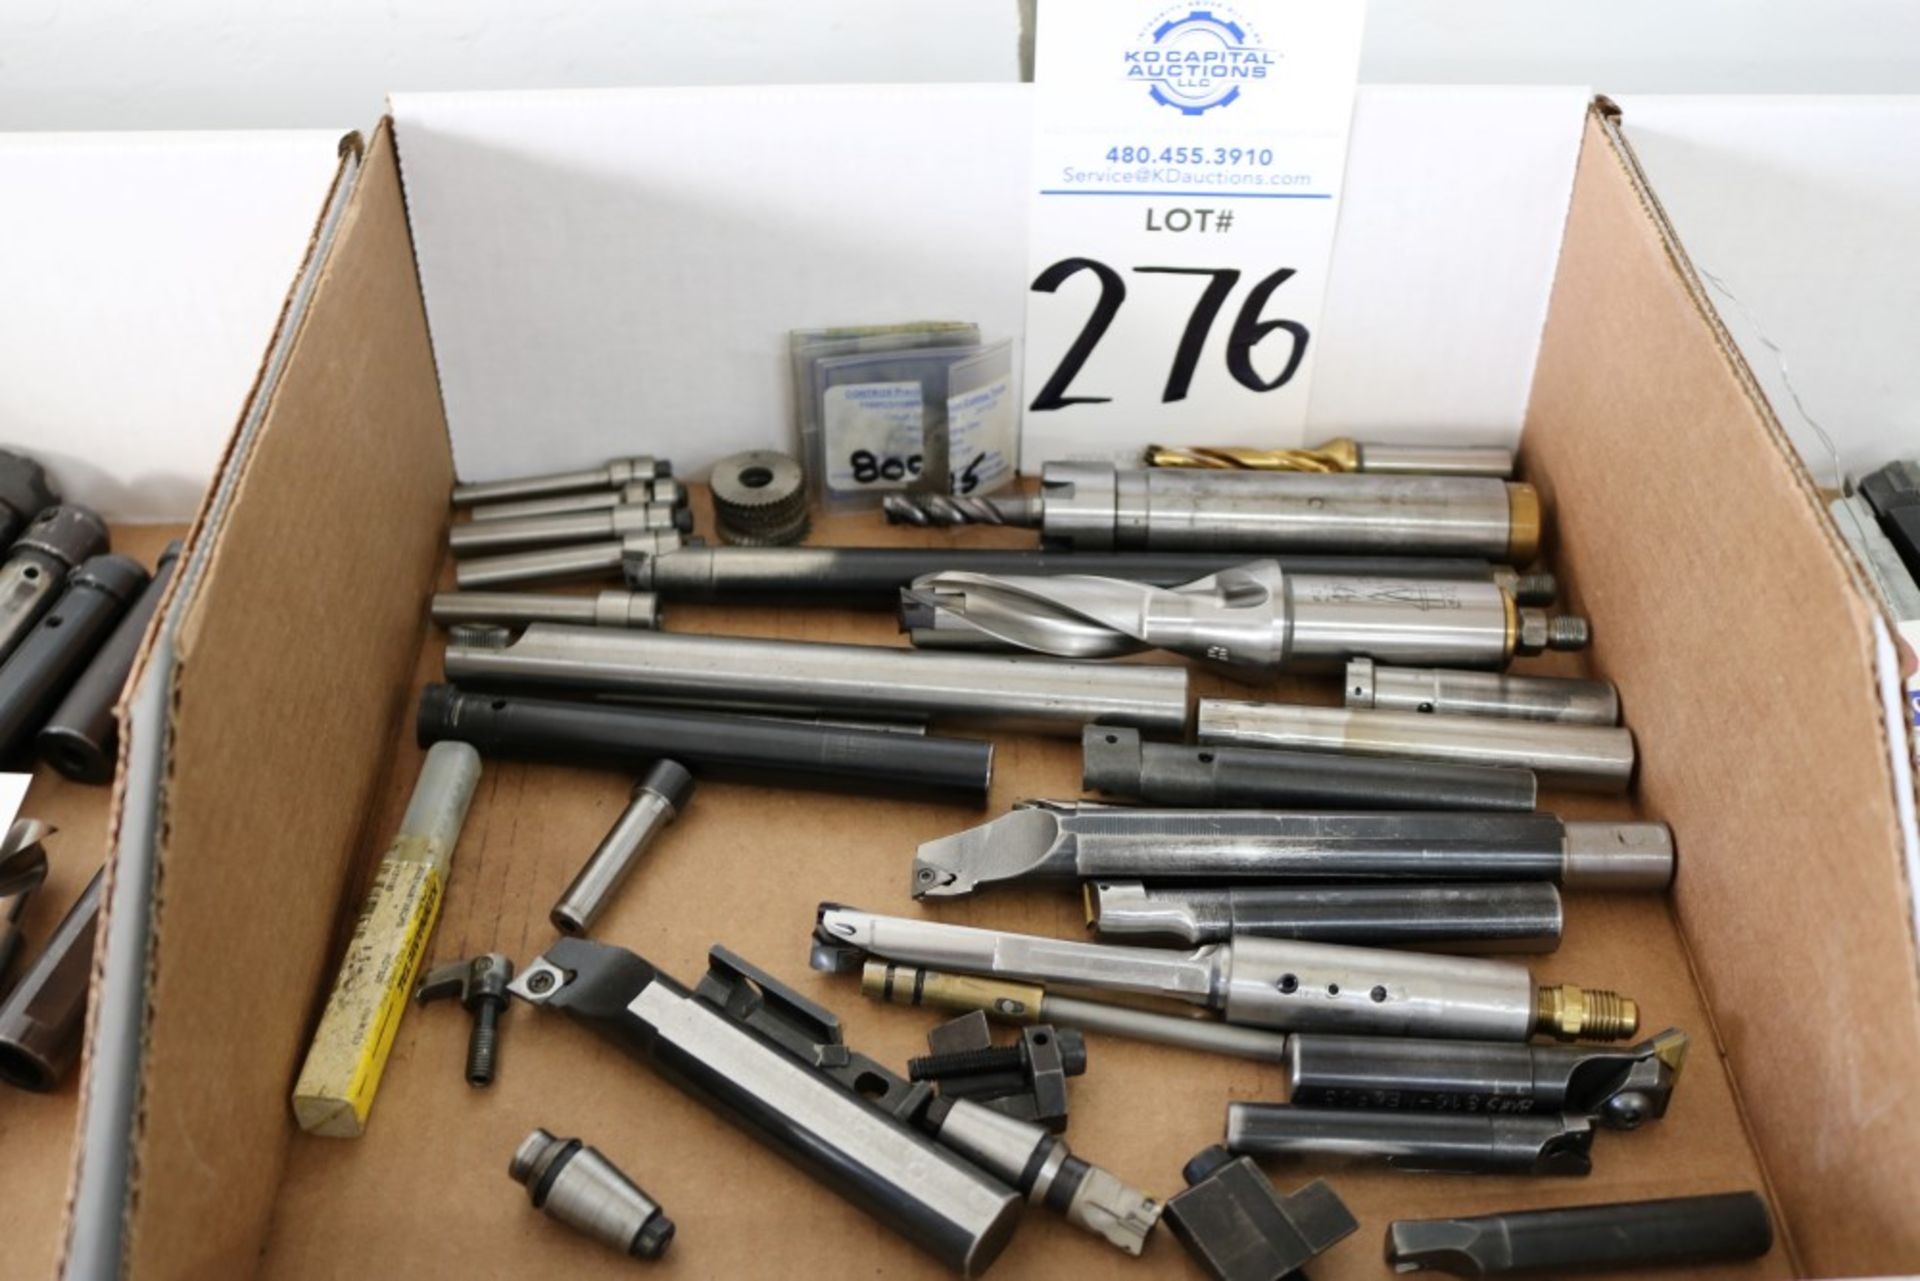 Box of ID Turning Tools, Insert Turning Tools, Mostly All Through Coolant, and Slitting Saws with - Image 3 of 3